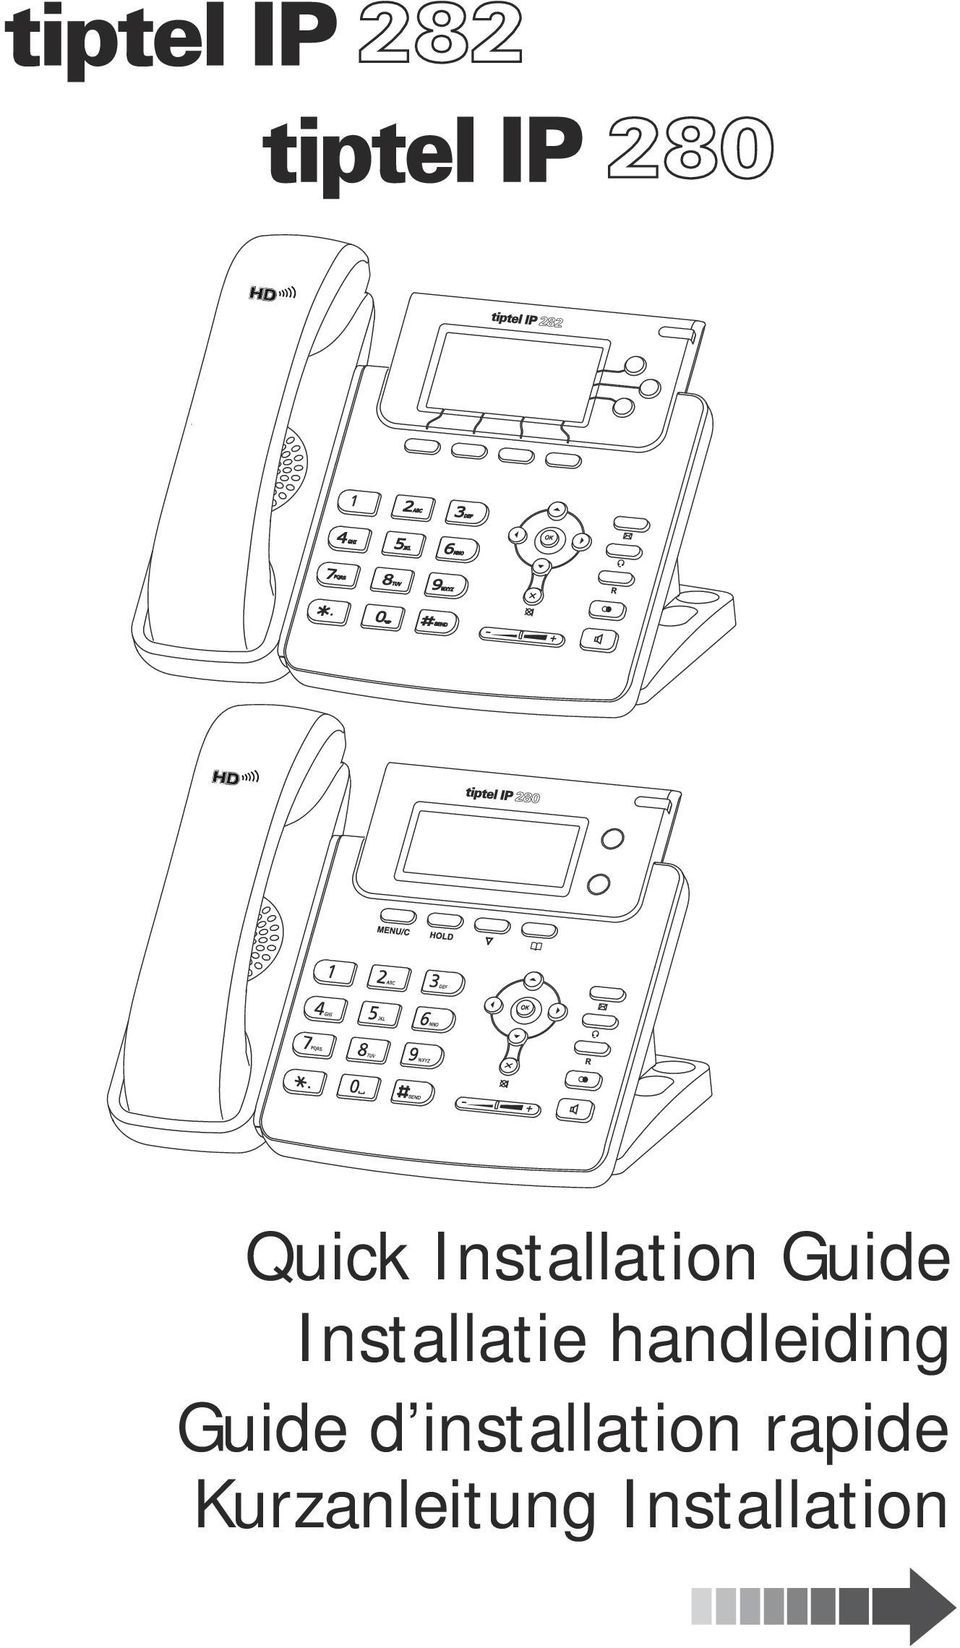 Guide d installation